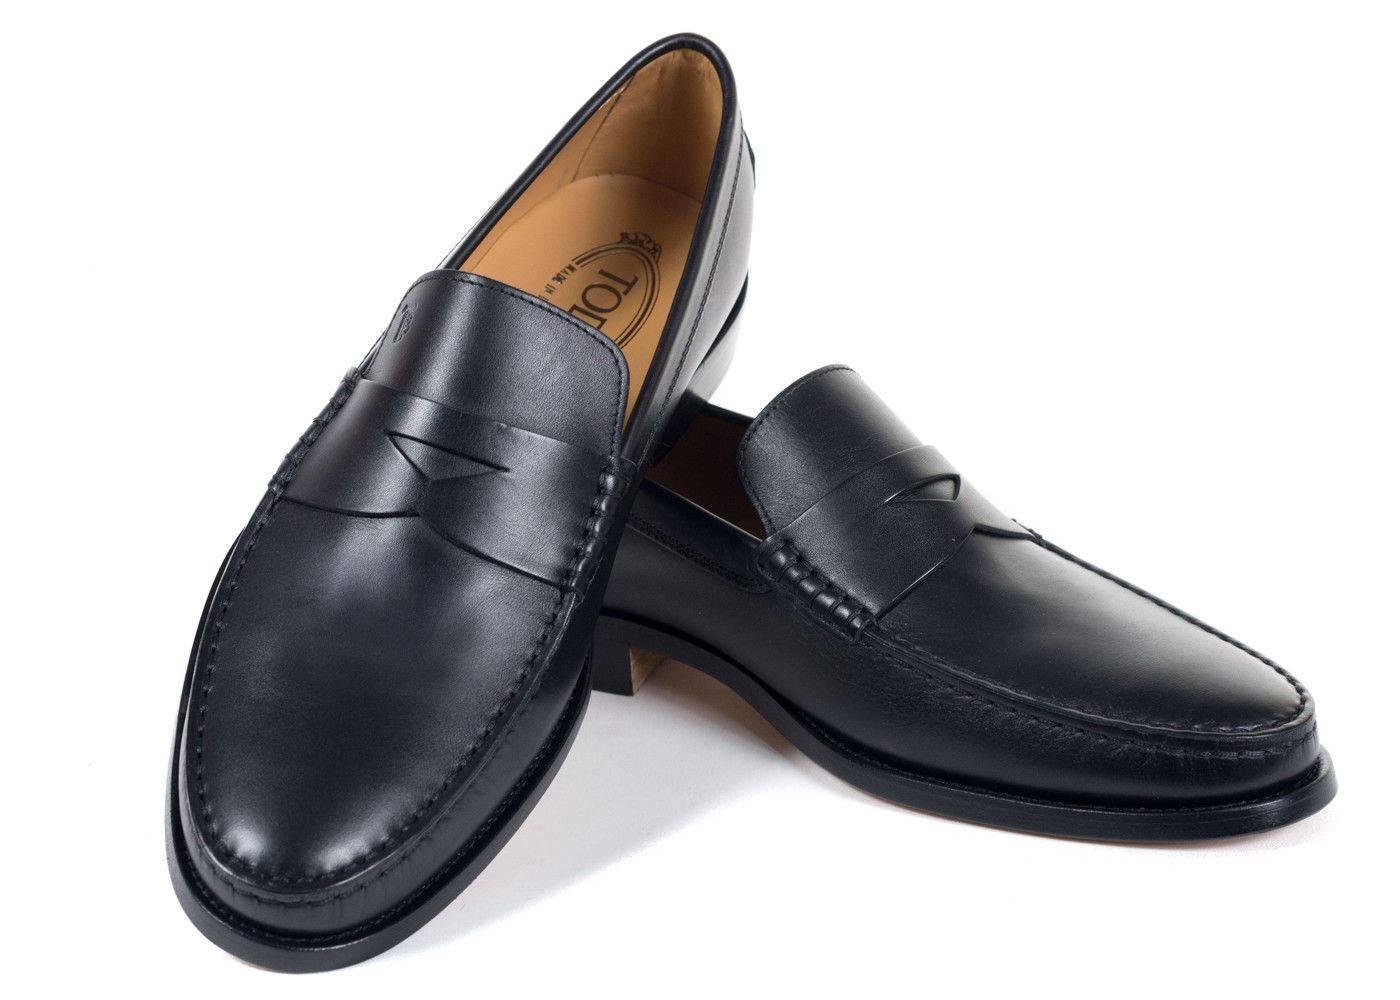 Brand New Tod's Men's Loafers
Original Box & Dust Bag Included
Retails in Stores & Online for $495
UK 6/ US 7
All Shoes are in UK Sizing

Tod's classic penny loafers crafted in black calfskin leather for an ultra smooth look to these shoes. These